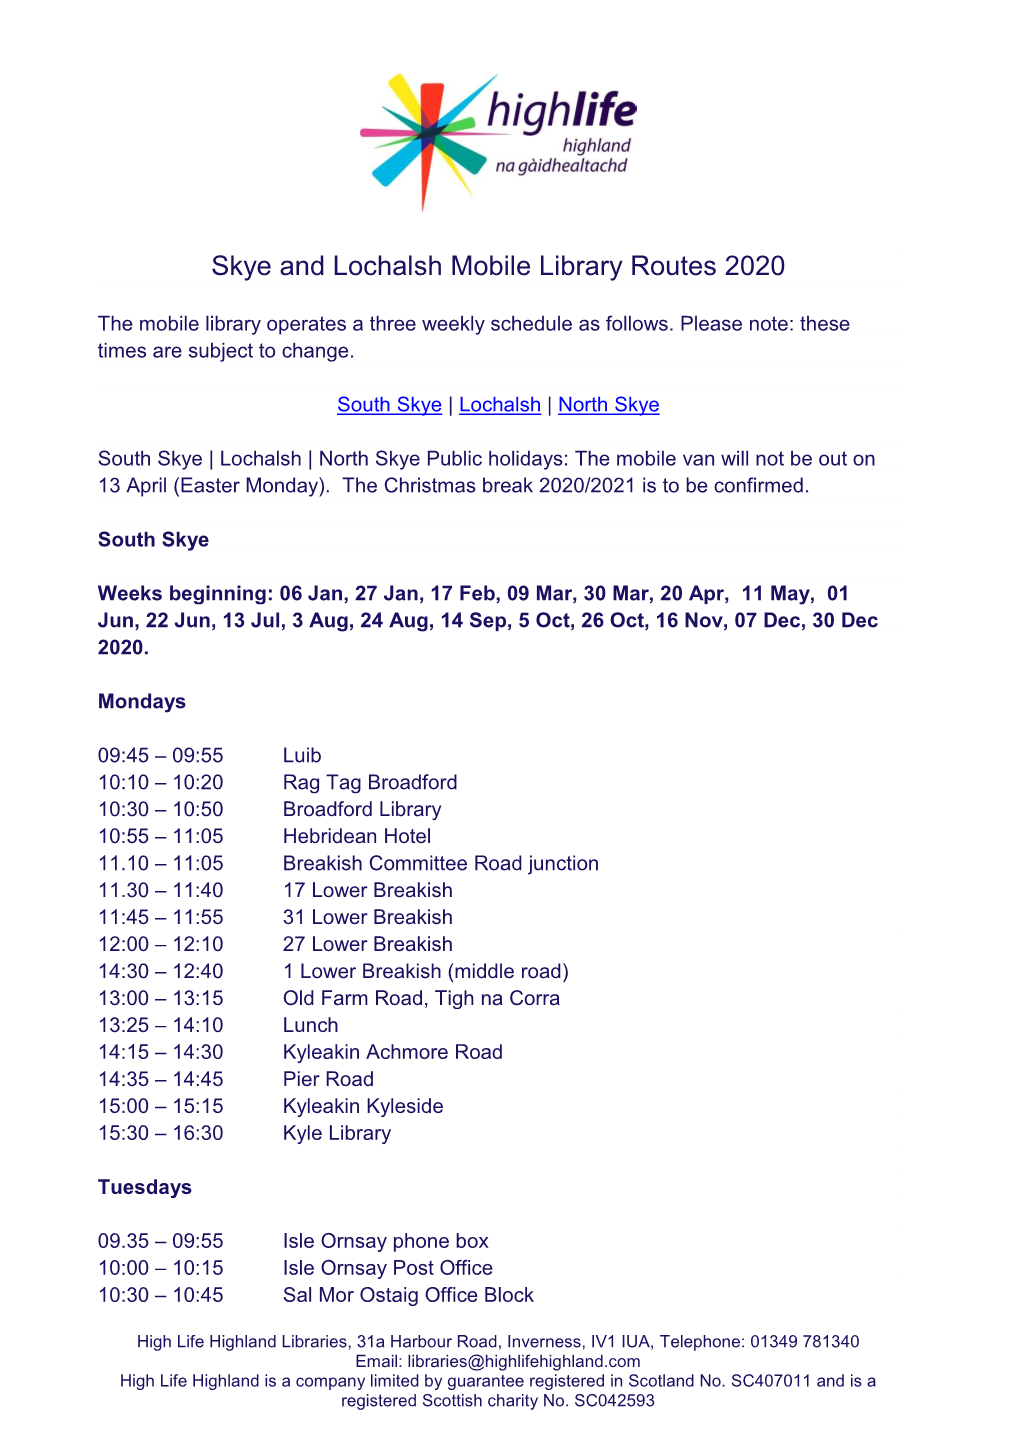 Skye and Lochalsh Mobile Library Routes 2020